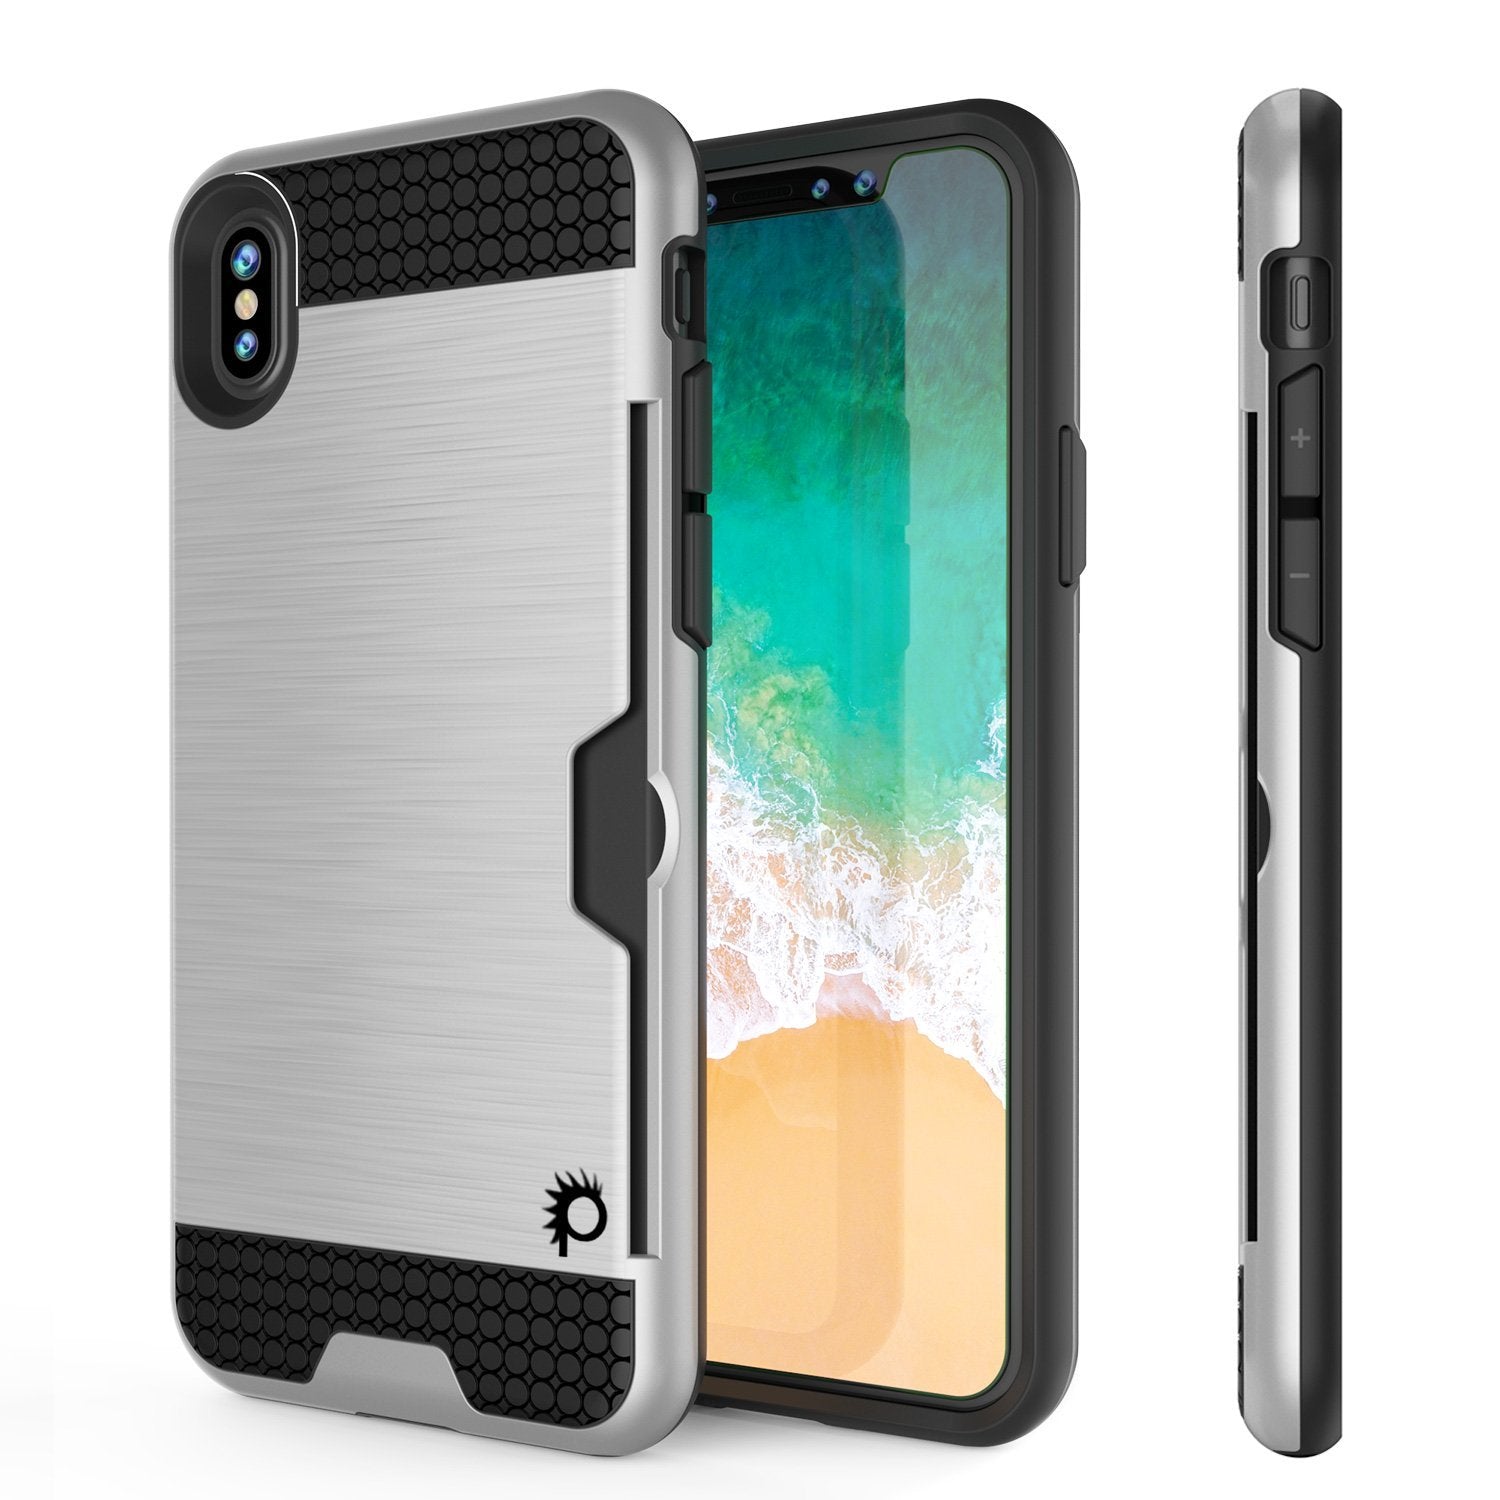 iPhone XS Max Case, PUNKcase [SLOT Series] Slim Fit Dual-Layer Armor Cover [White]